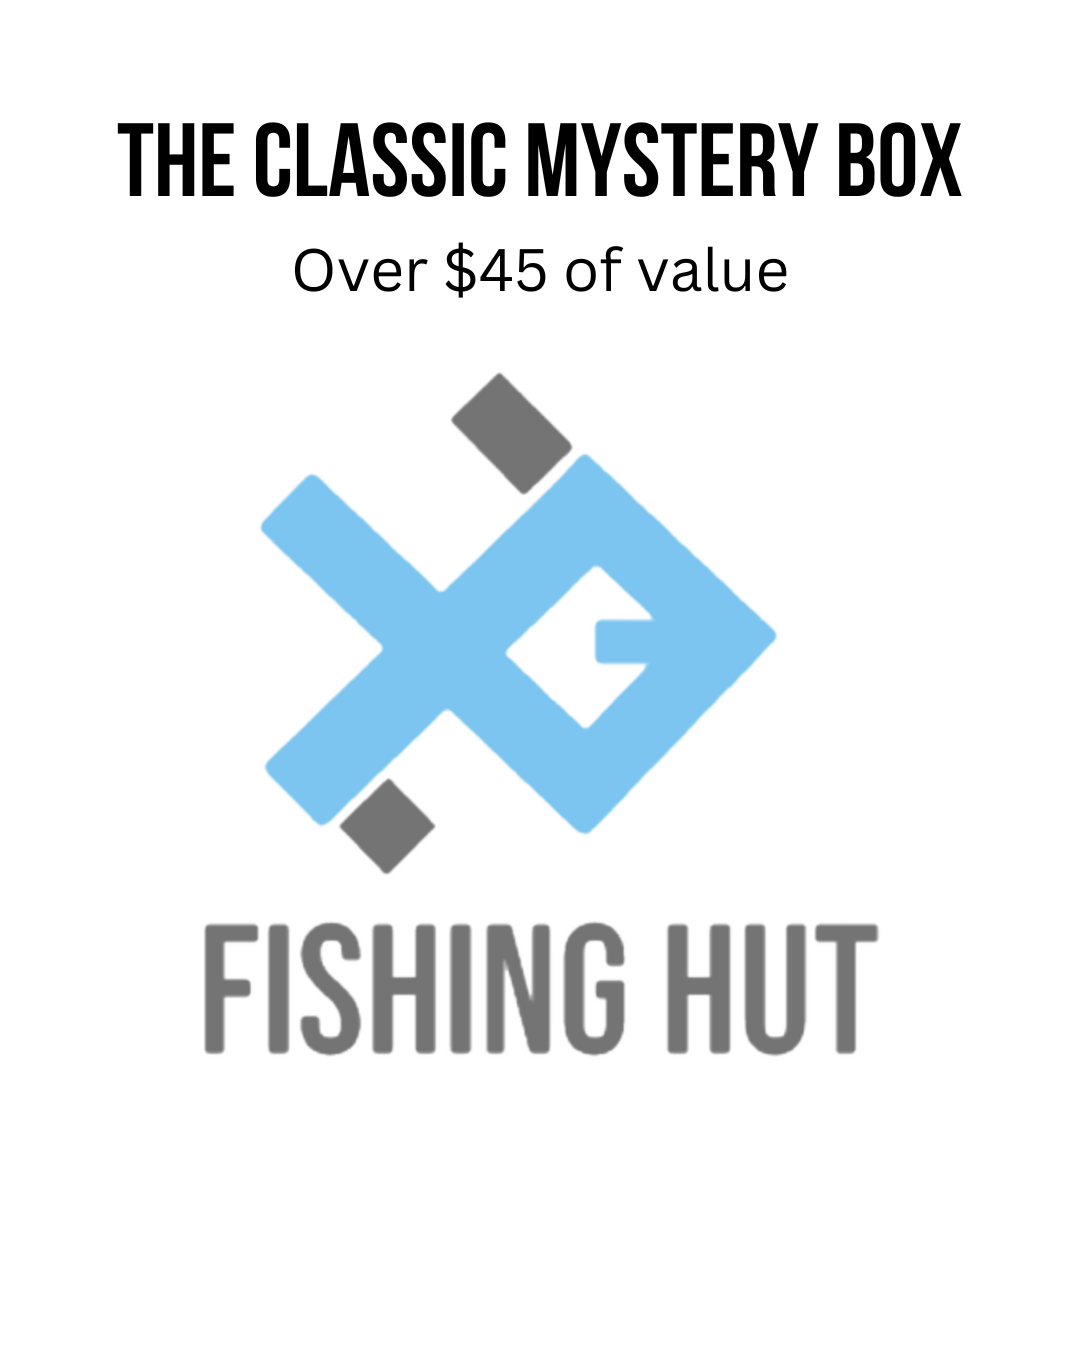 The Classic Mystery Box